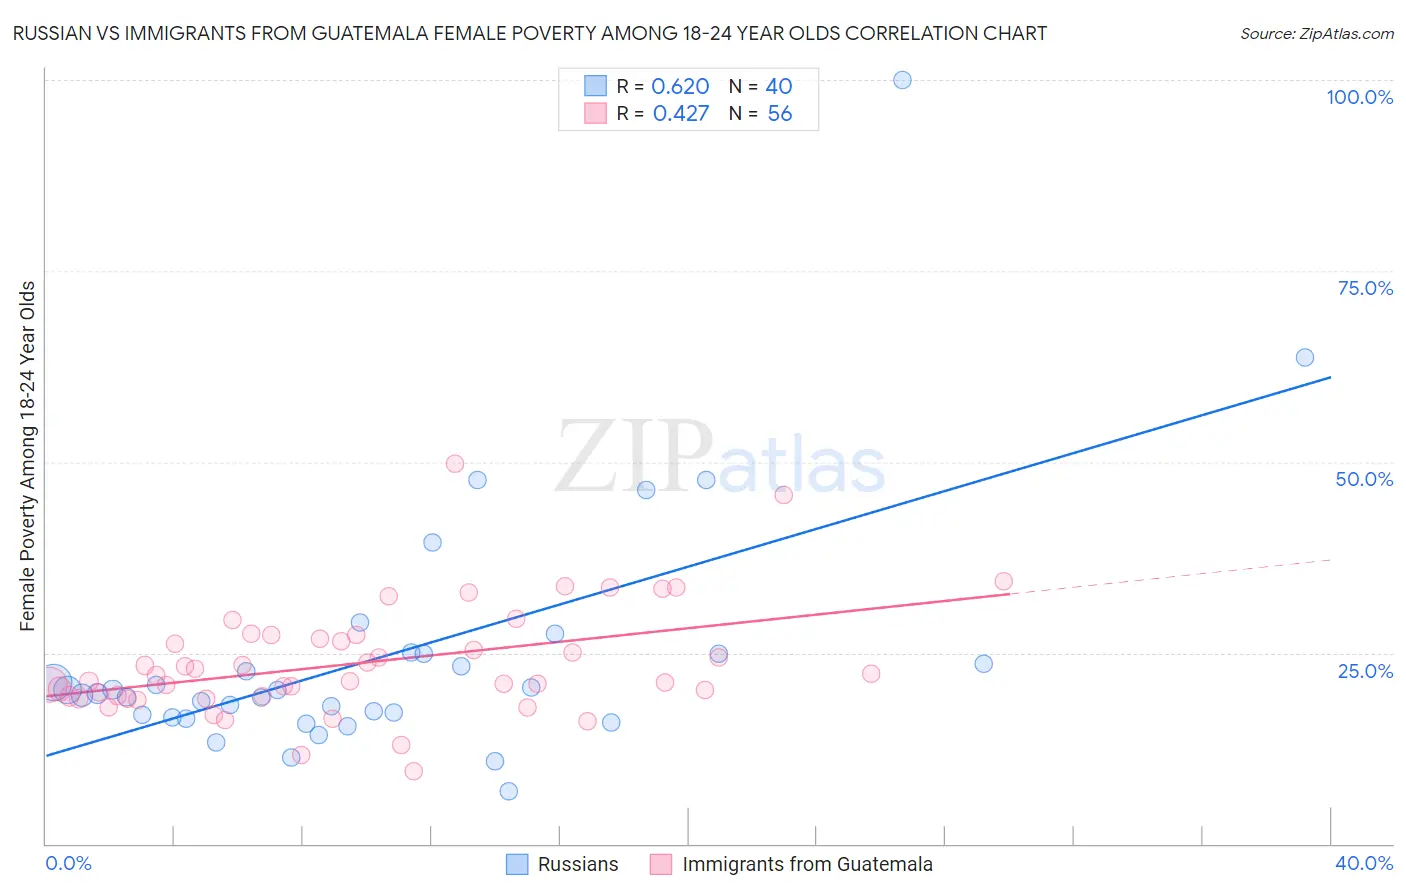 Russian vs Immigrants from Guatemala Female Poverty Among 18-24 Year Olds